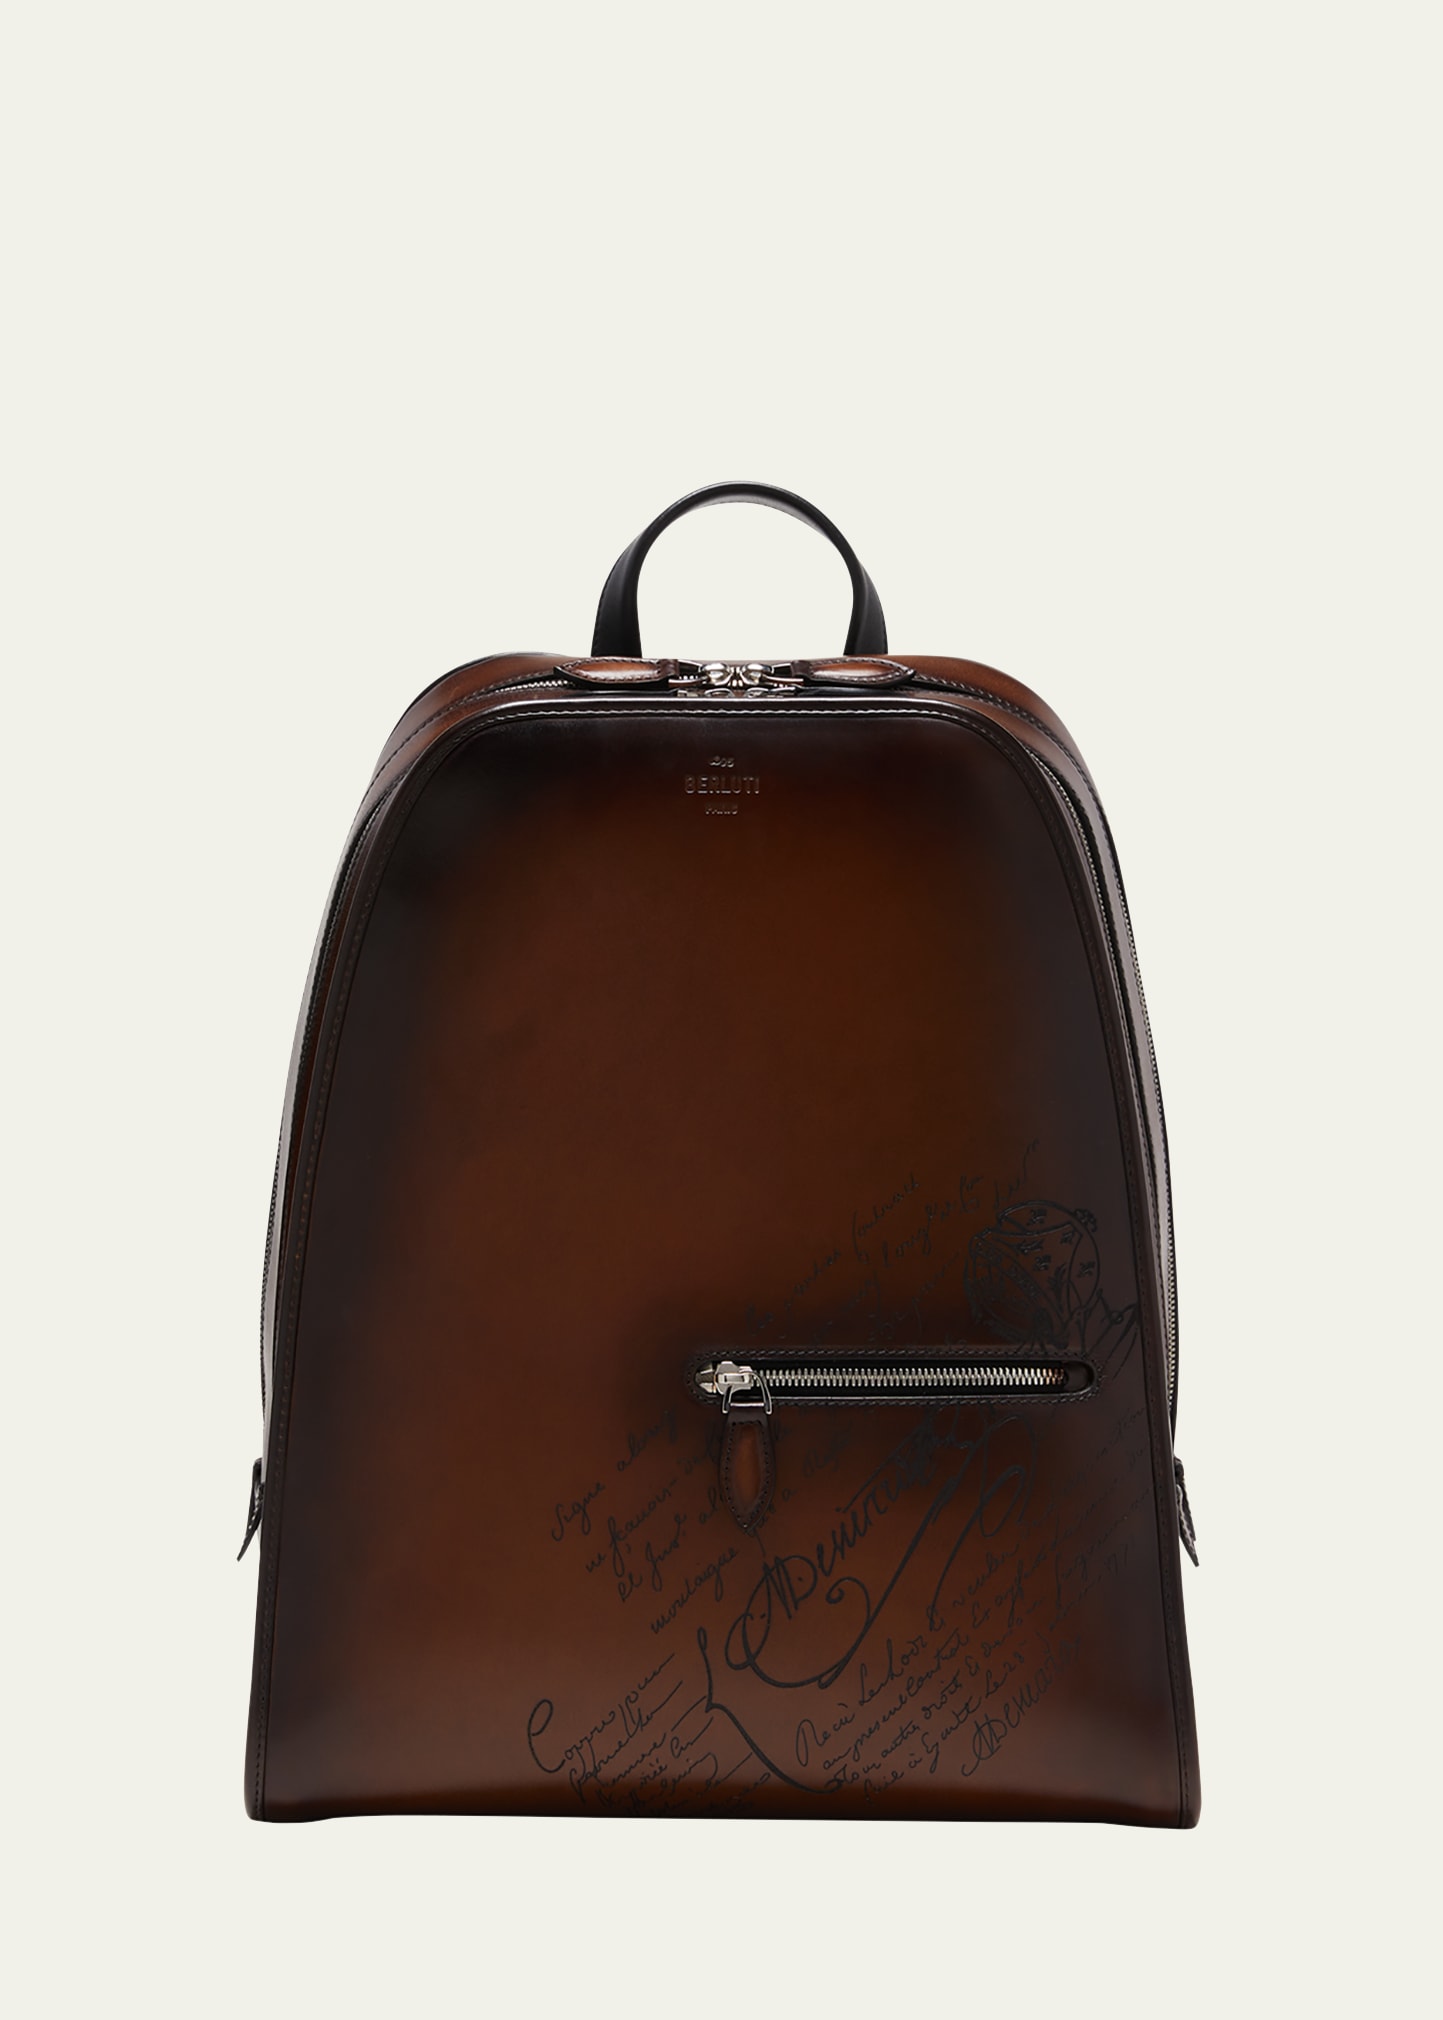 Berluti Men's Working Day Scritto Leather Backpack In Cacao Intenso